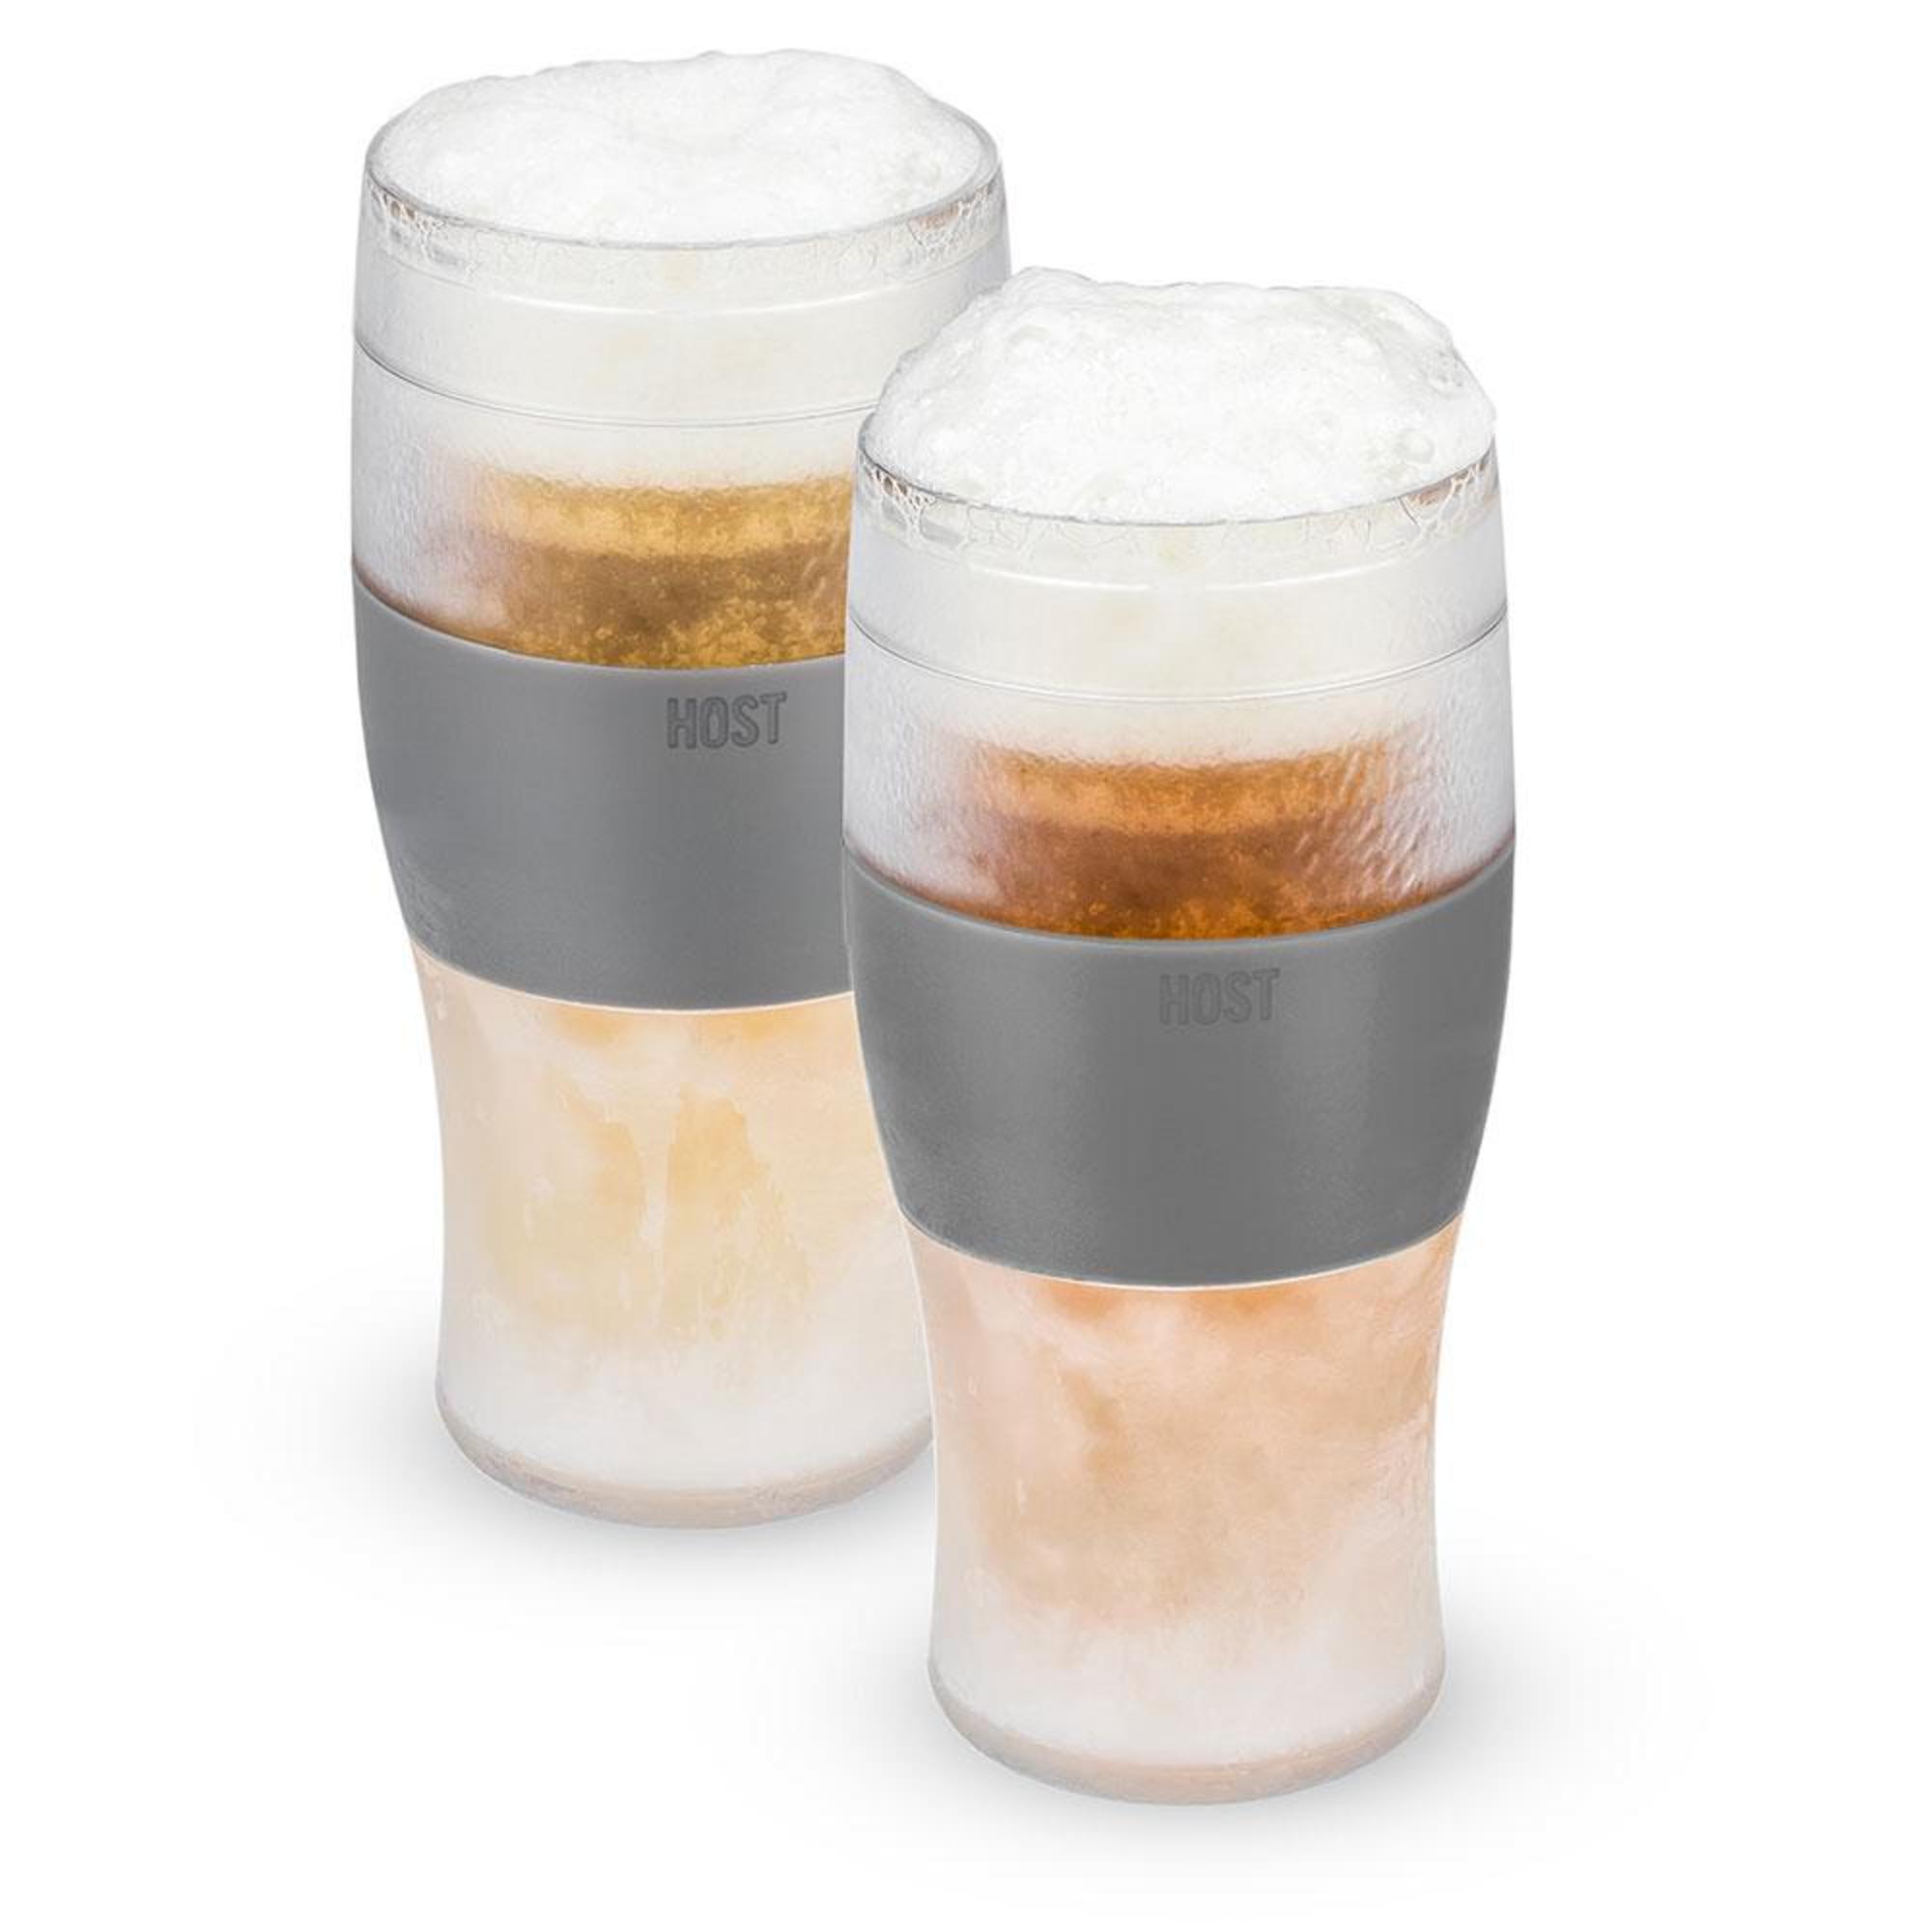 Host Freeze Beer Glasses - Double Walled Insulated Plastic Pint Glasses, Grey - image 1 of 13